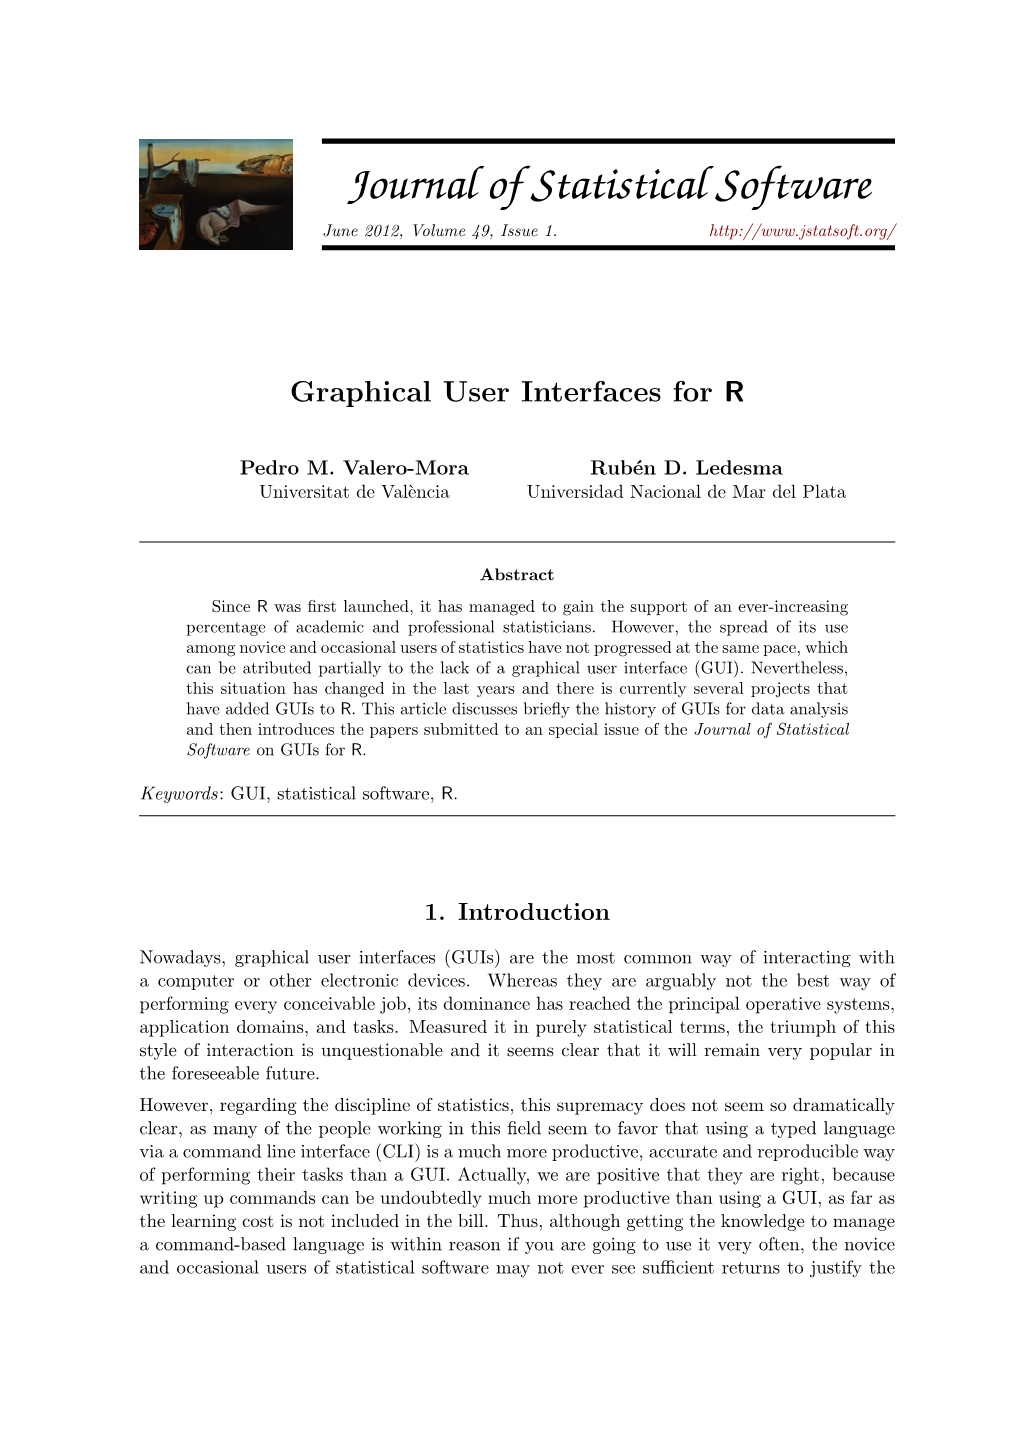 Graphical User Interfaces for R